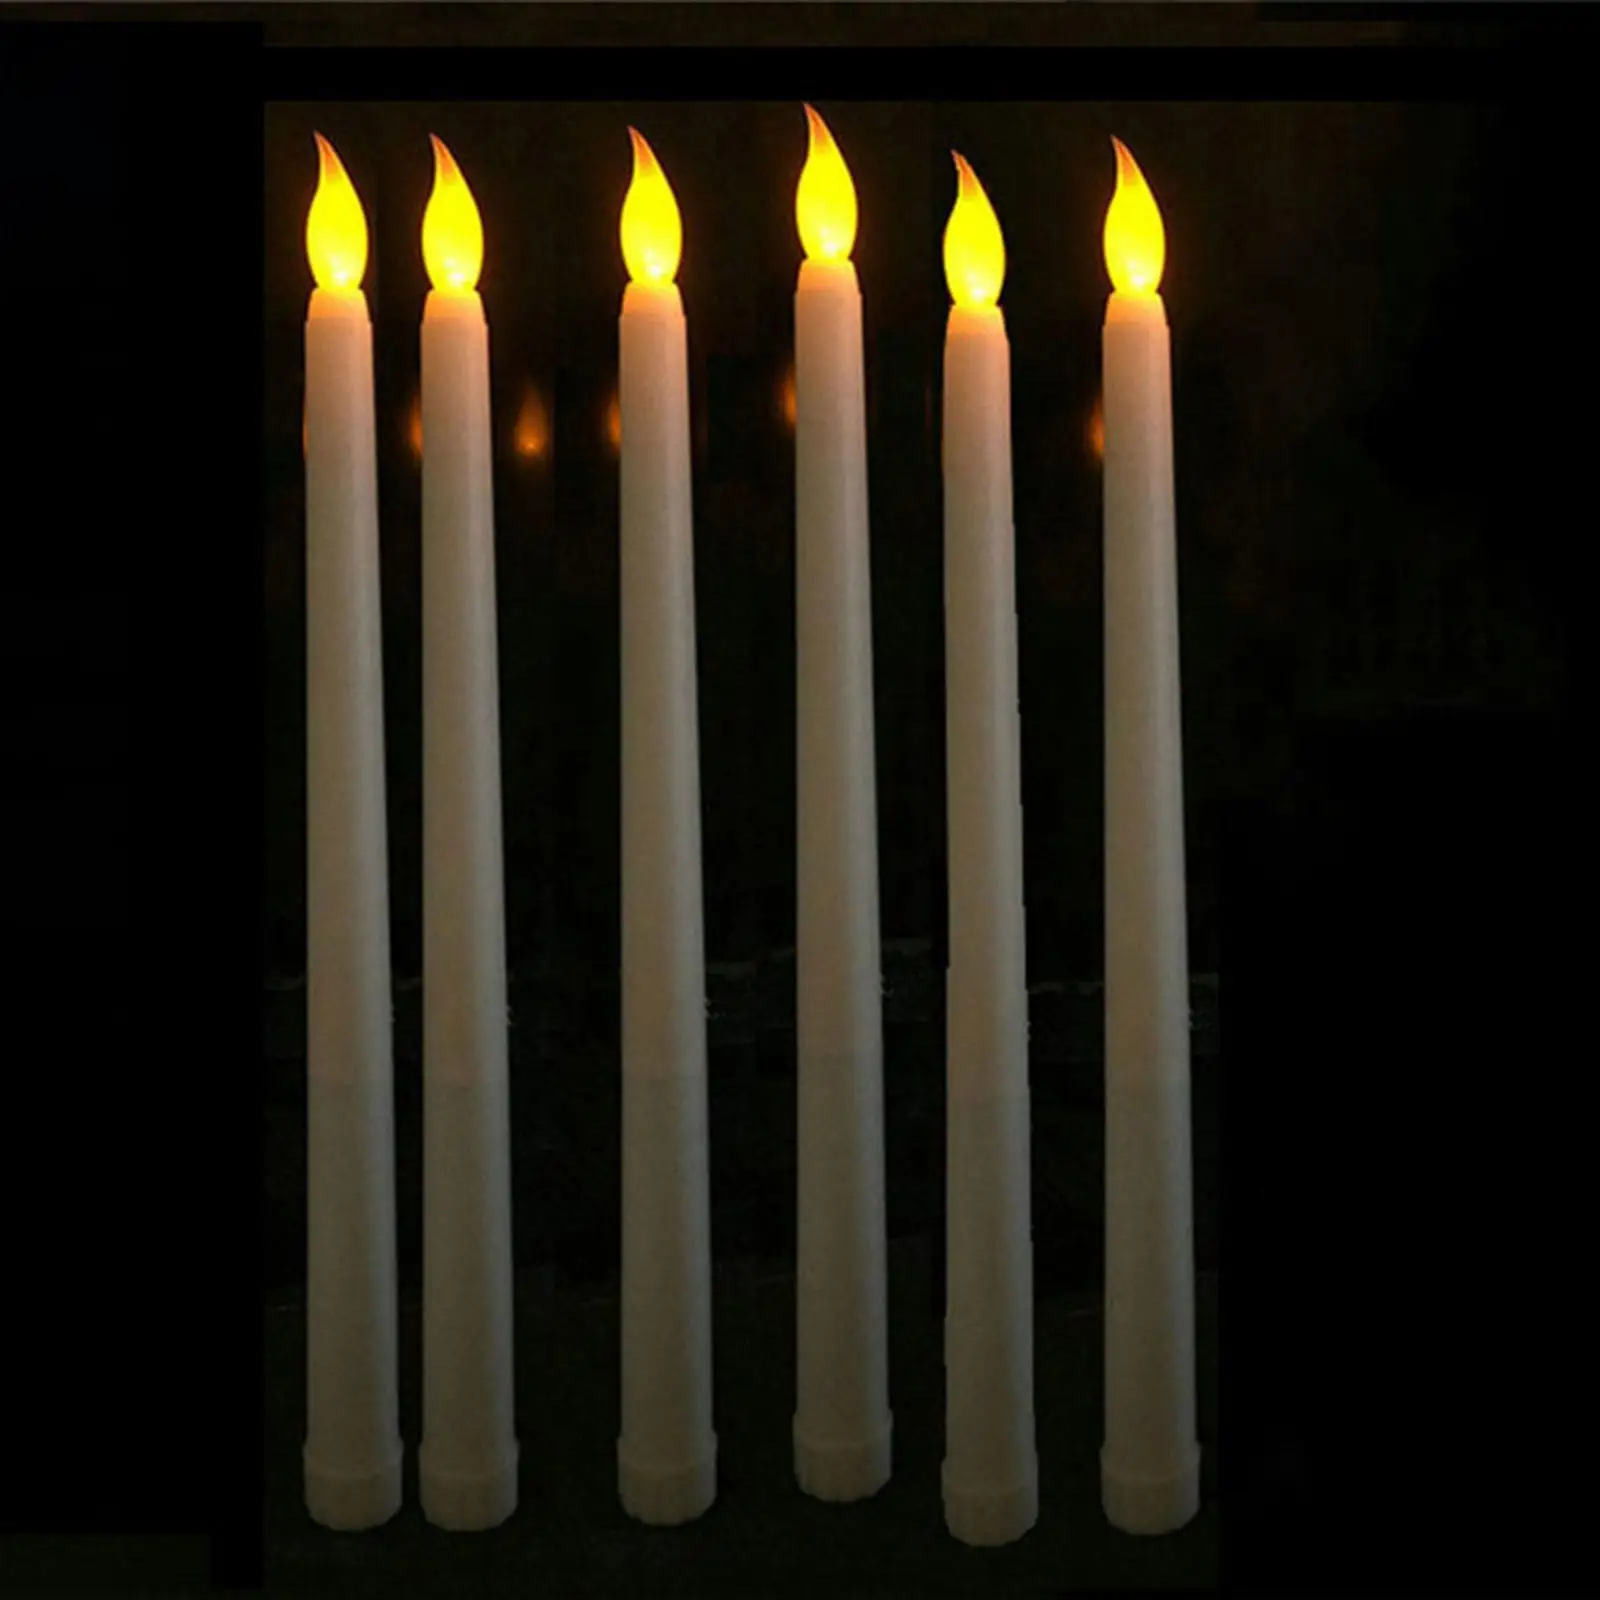 6 Pieces Flameless LED Candles Battery Operated for Holiday Wedding Decor